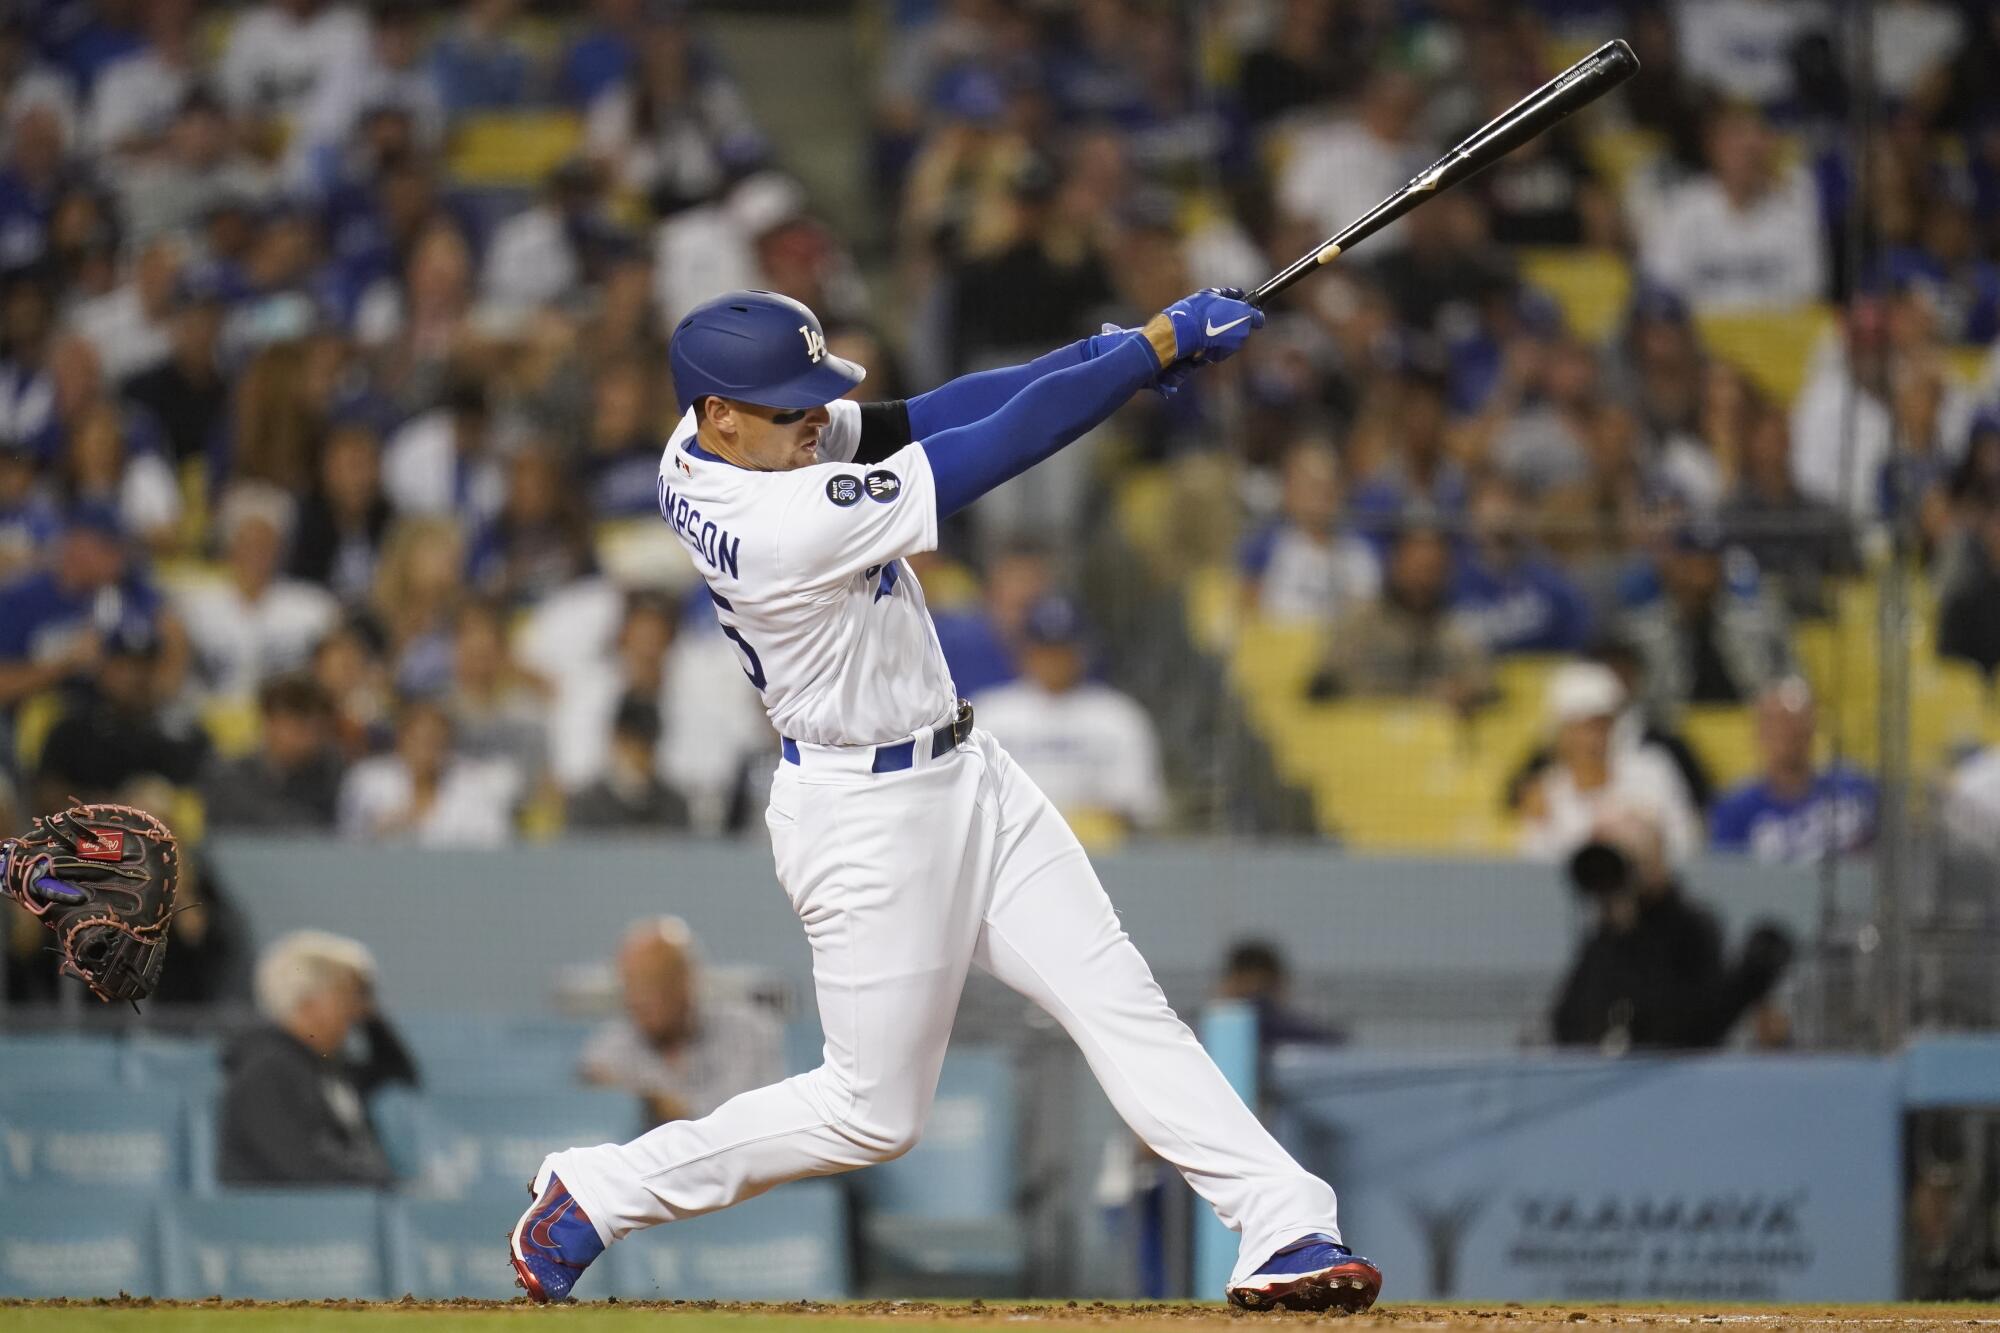 Los Angeles Dodgers designated hitter Trayce Thompson (25) hits a home run during the third inning.